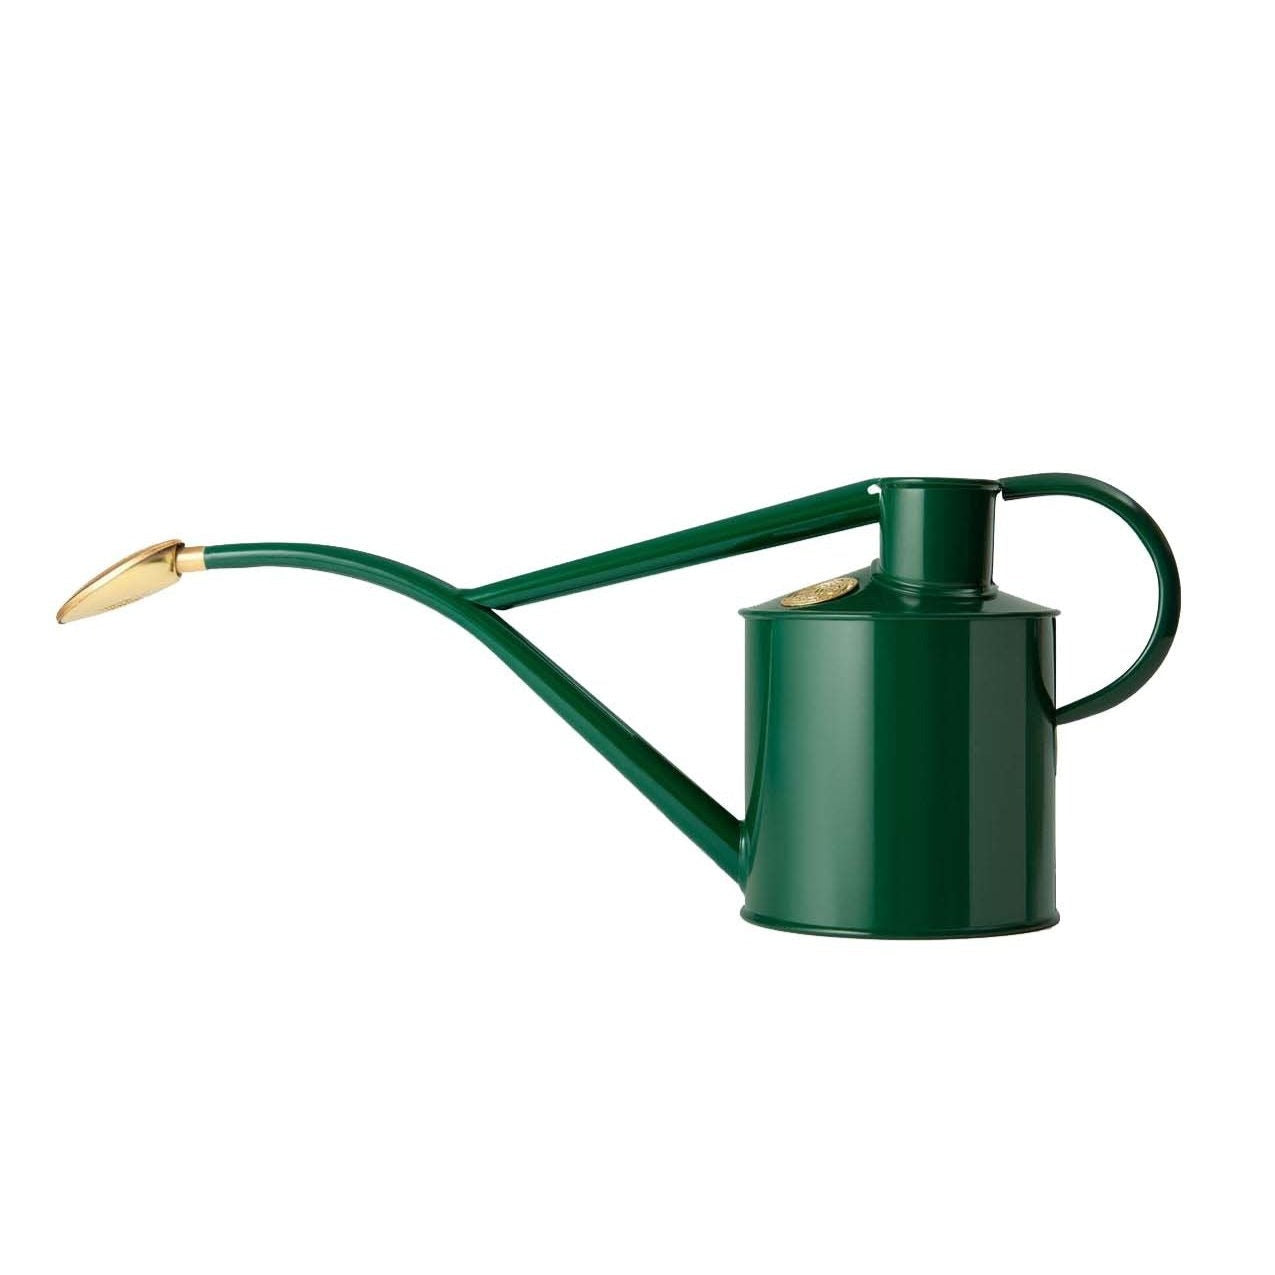 Haws 'Rowley Ripple' 1-litre indoor watering can in sage. Introducing the ultimate multi-purpose metal watering can, an elegant and versatile companion to help you grow your own.